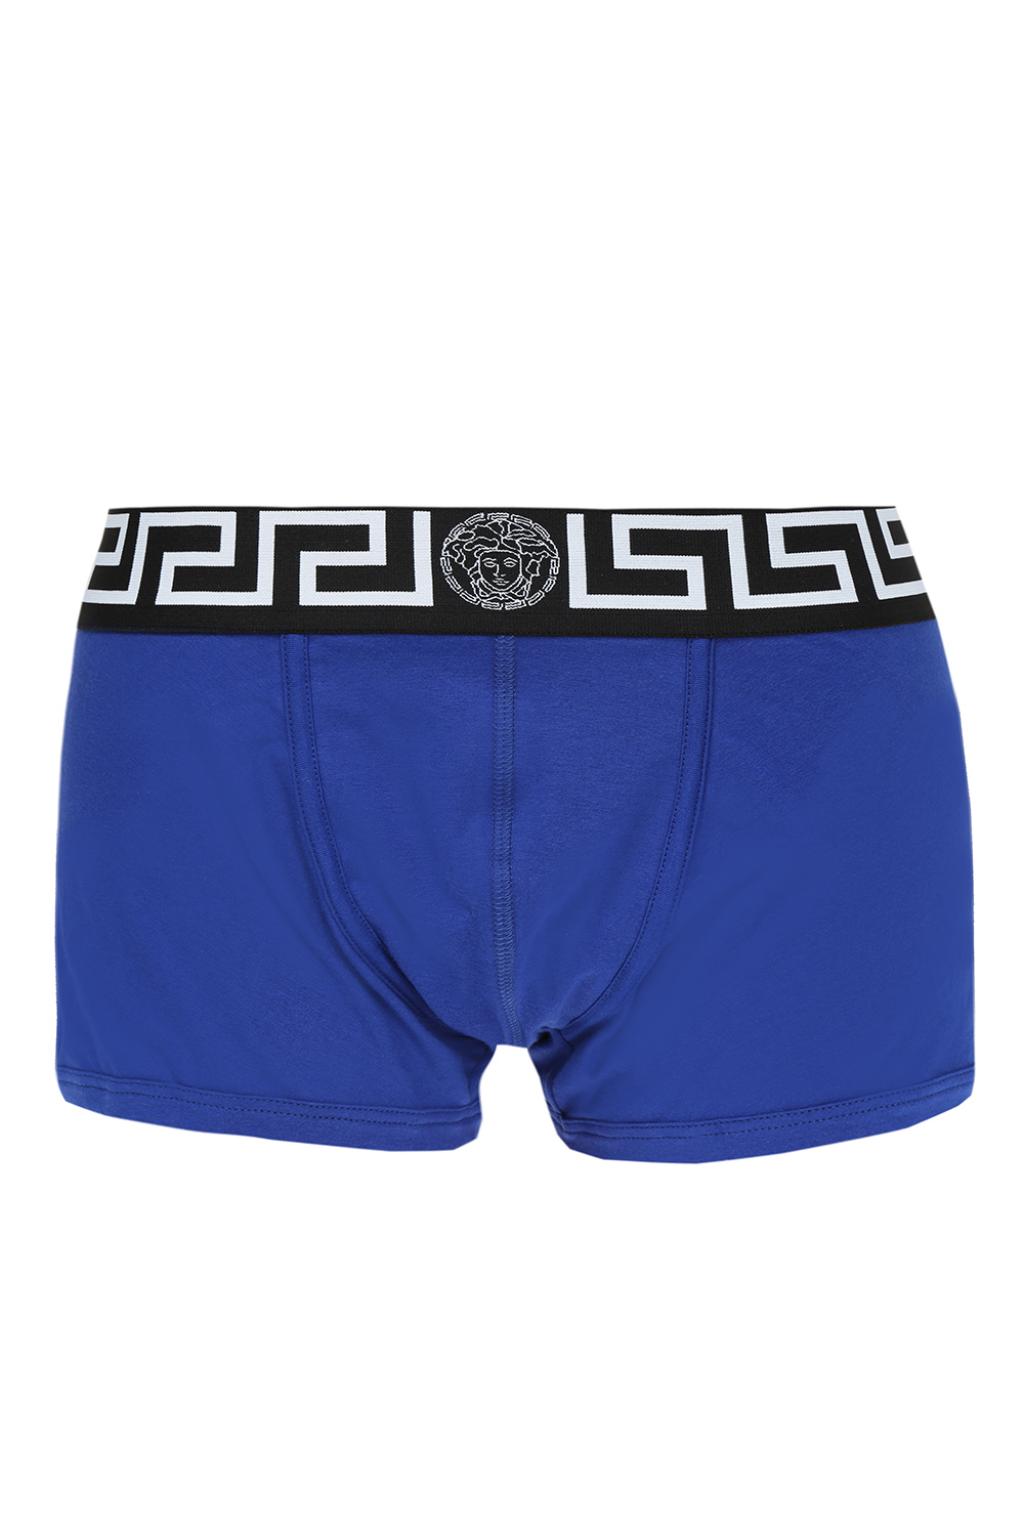 Blue Boxers two-pack Versace - Vitkac GB